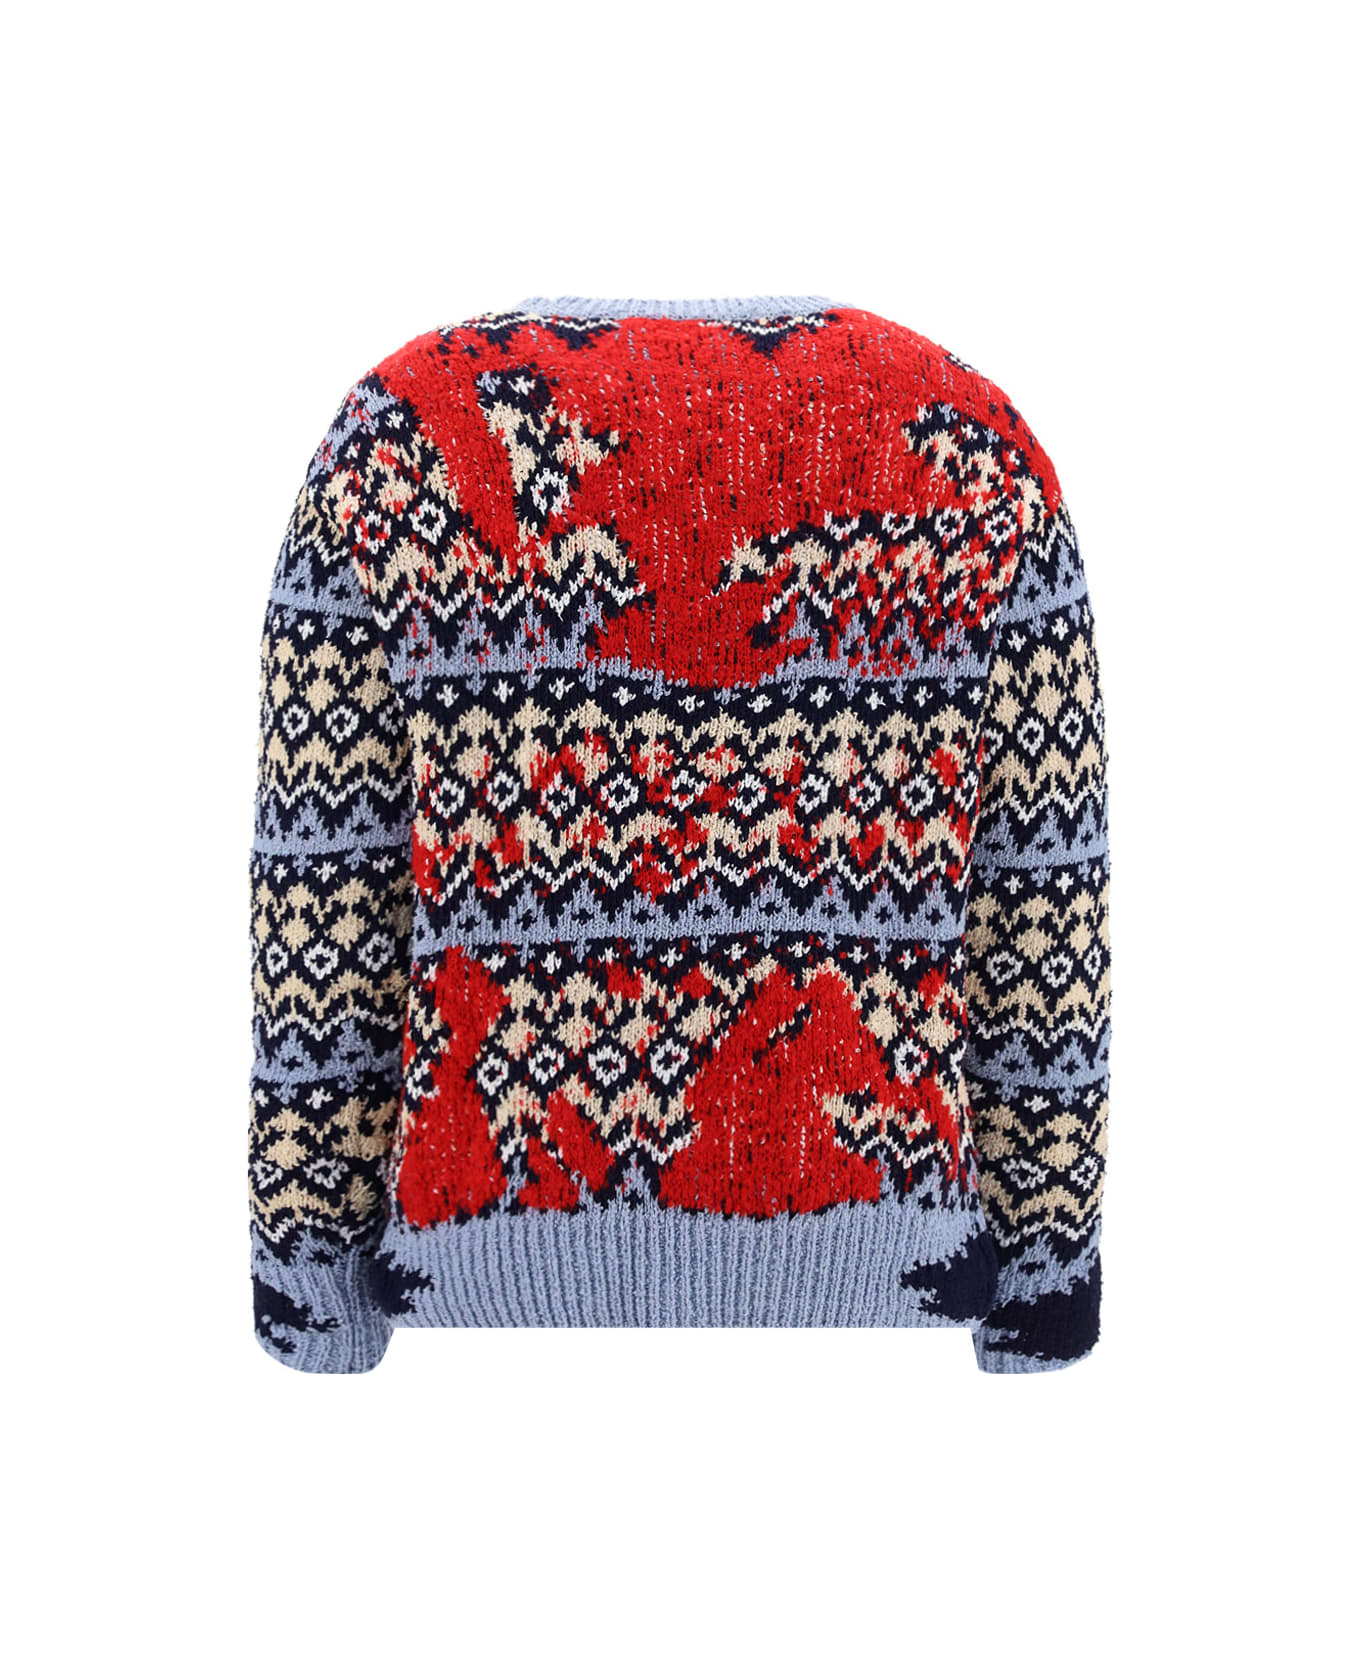 Andersson Bell Submerge Nordic Sweater - Red/navy